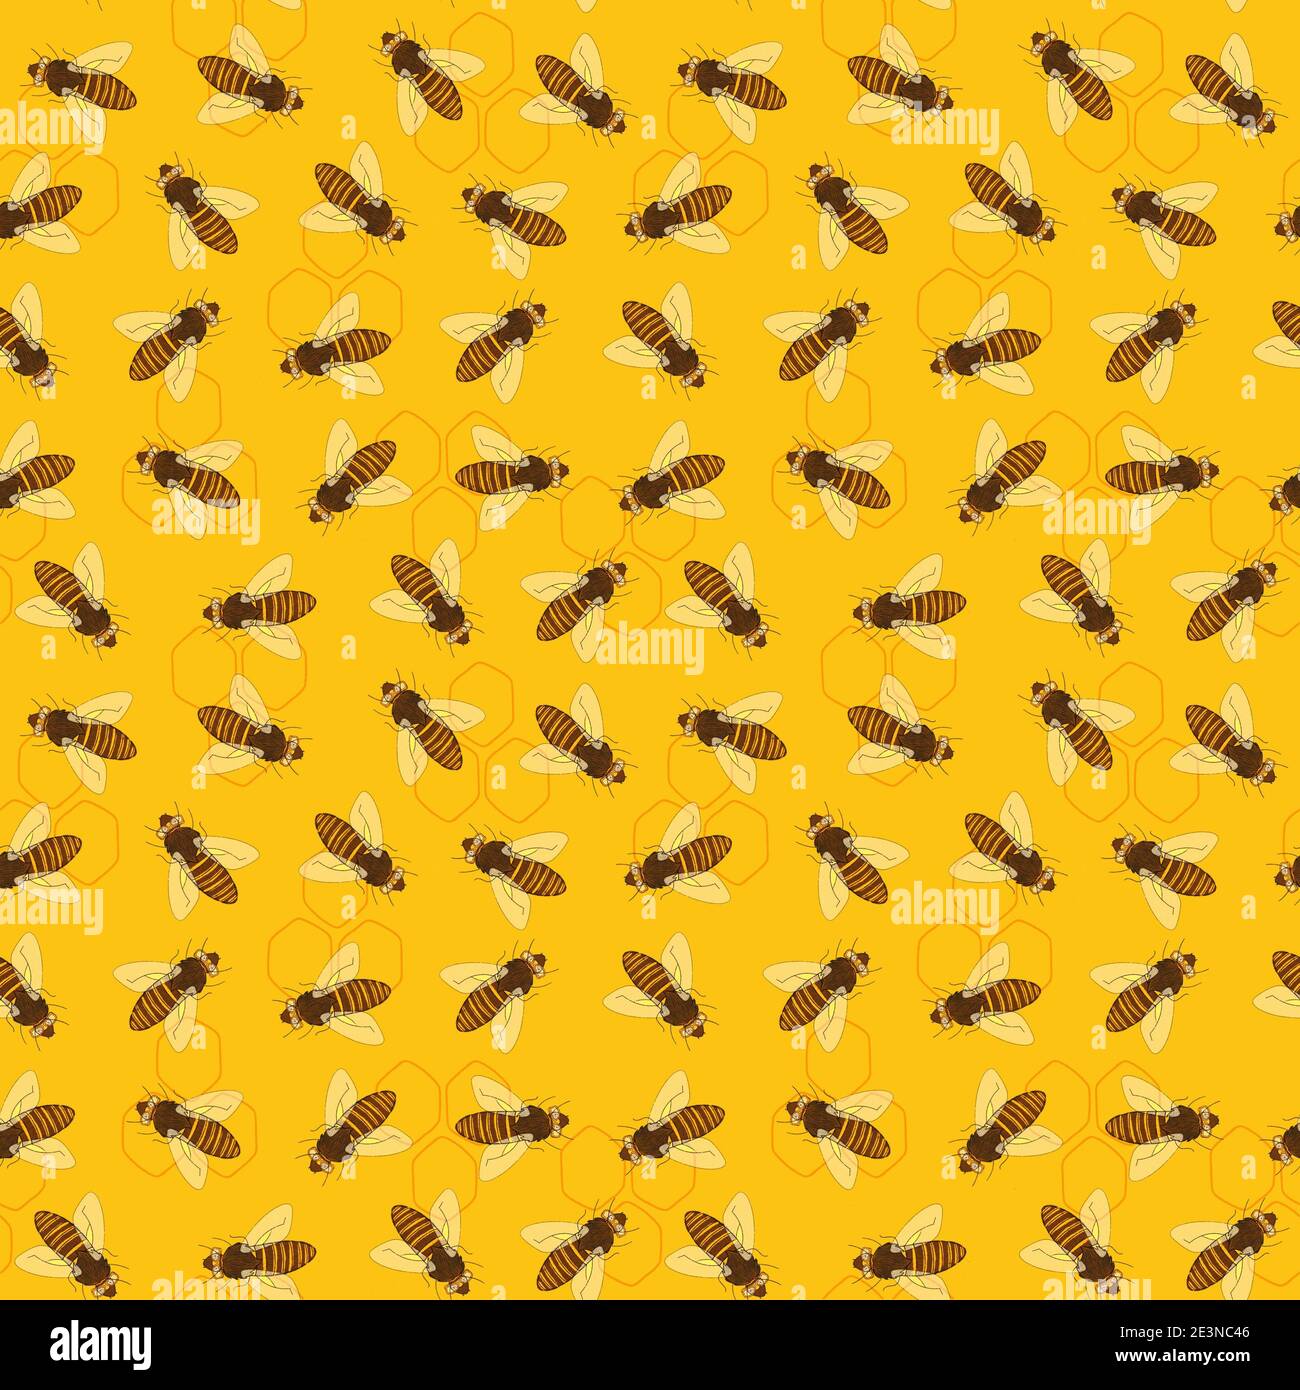 Illustrated seamless background with honey bees and honeycombs. Stock Photo